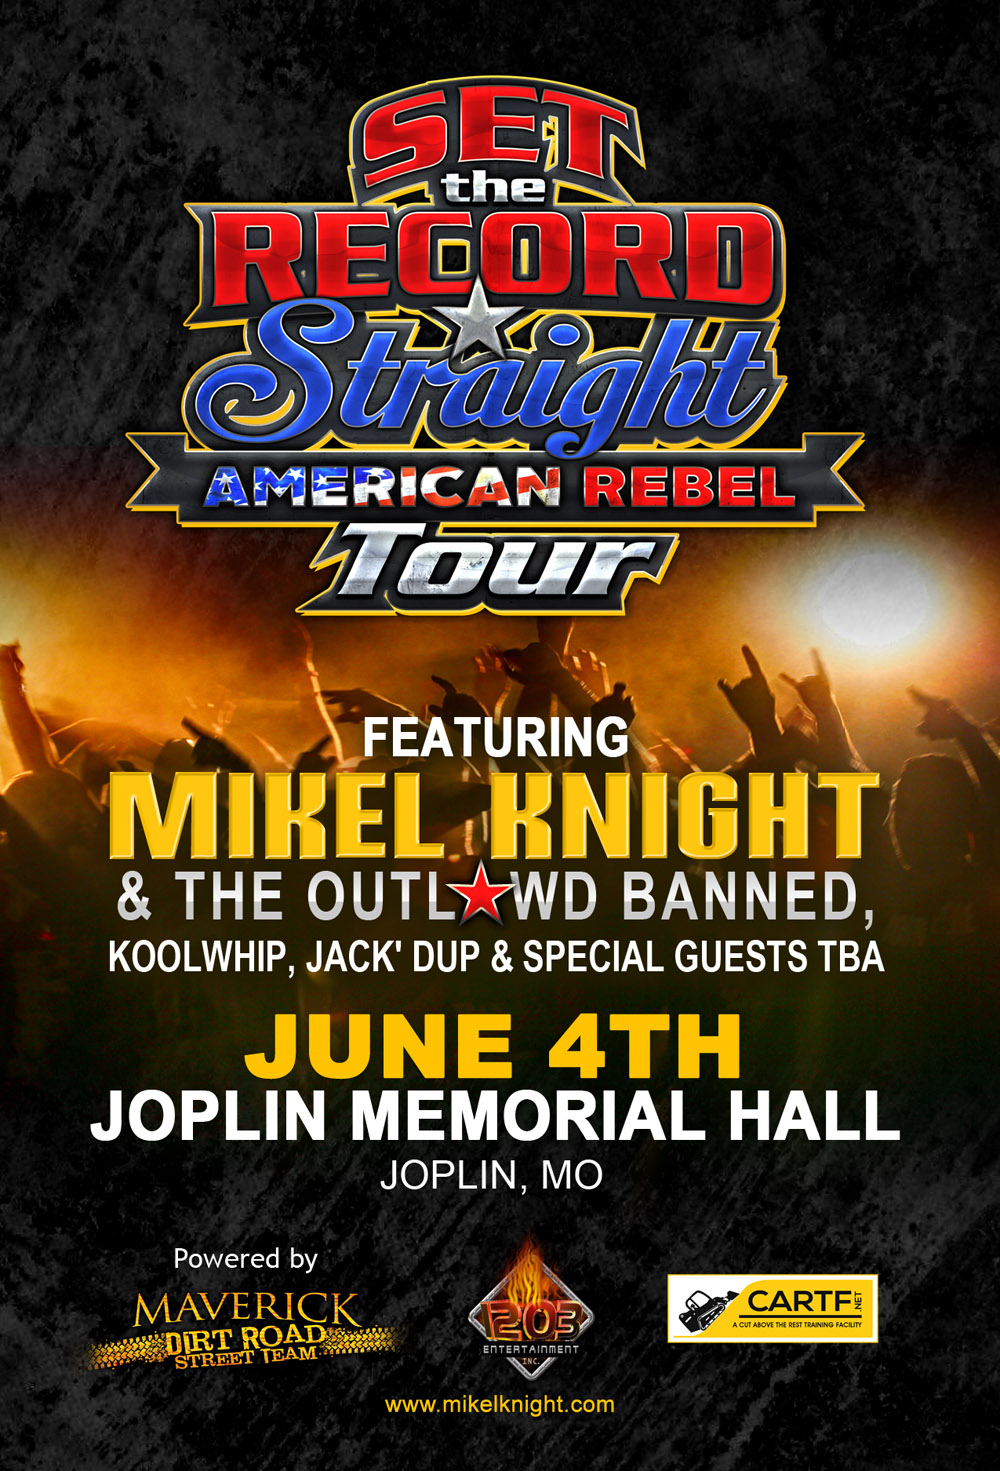 Set The Record Straight American Rebel Tour – June 4th